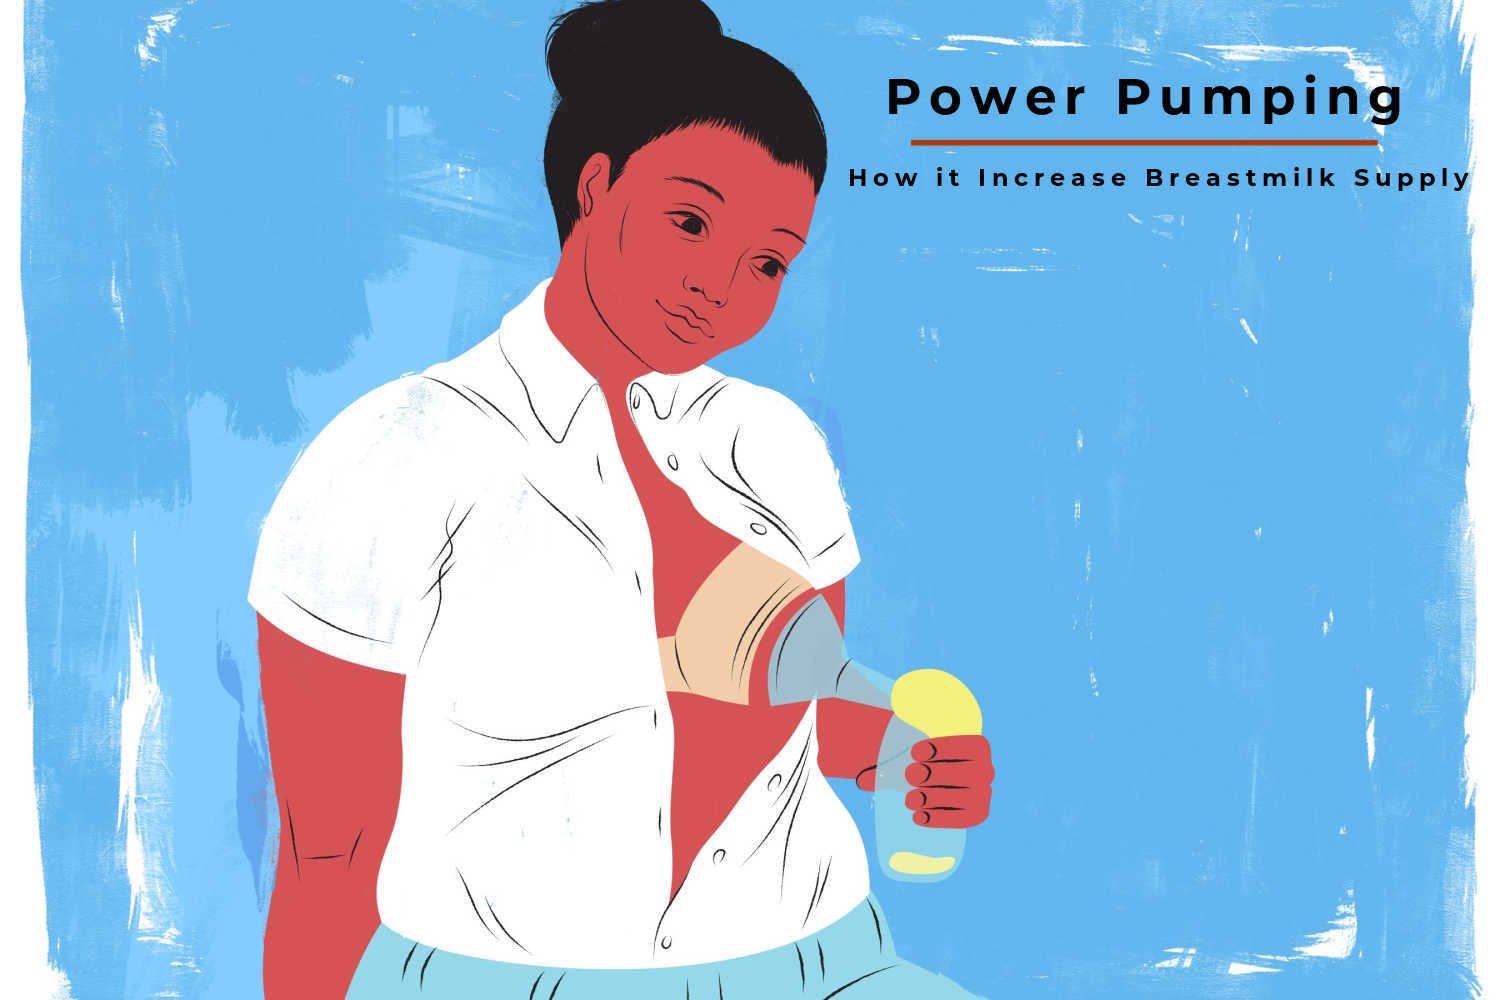 Power Pumping – Is it Safe and How it Increase Breastmilk Supply